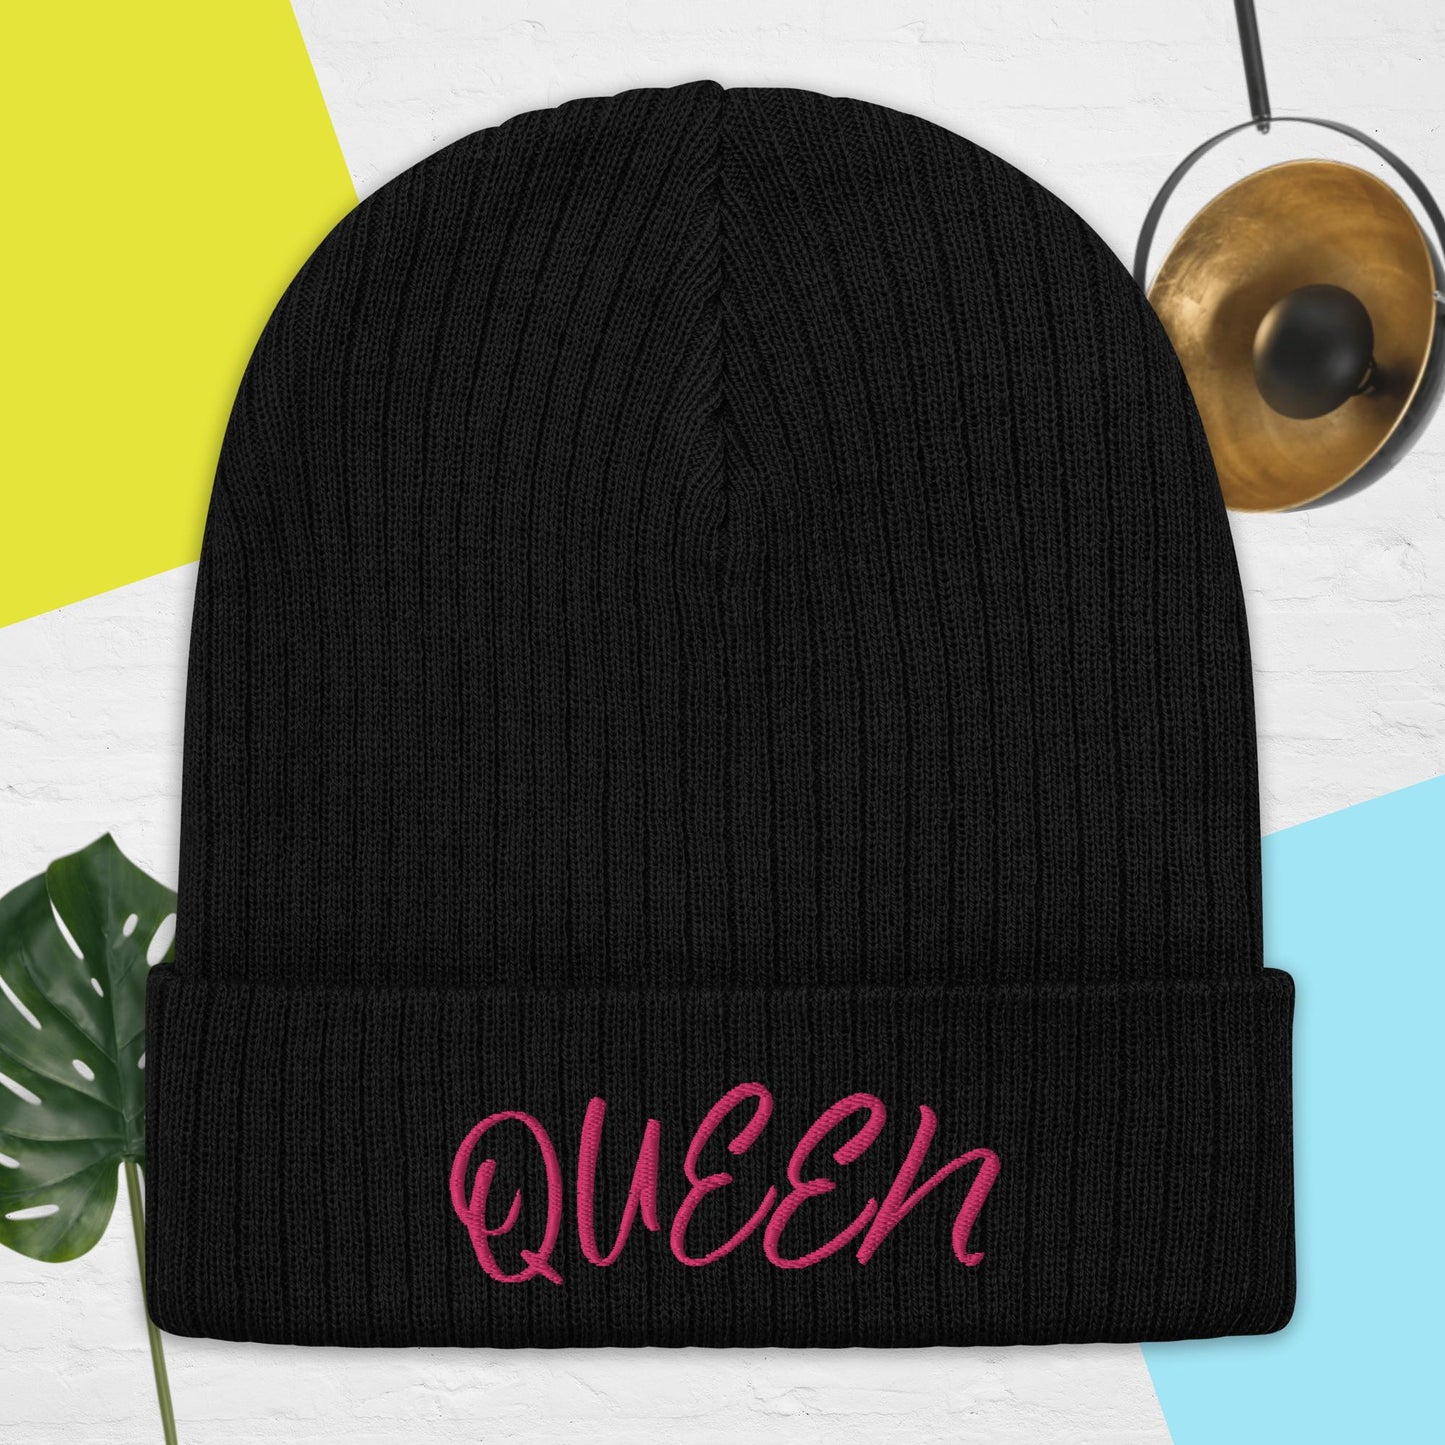 "Queen" Ribbed knit beanie